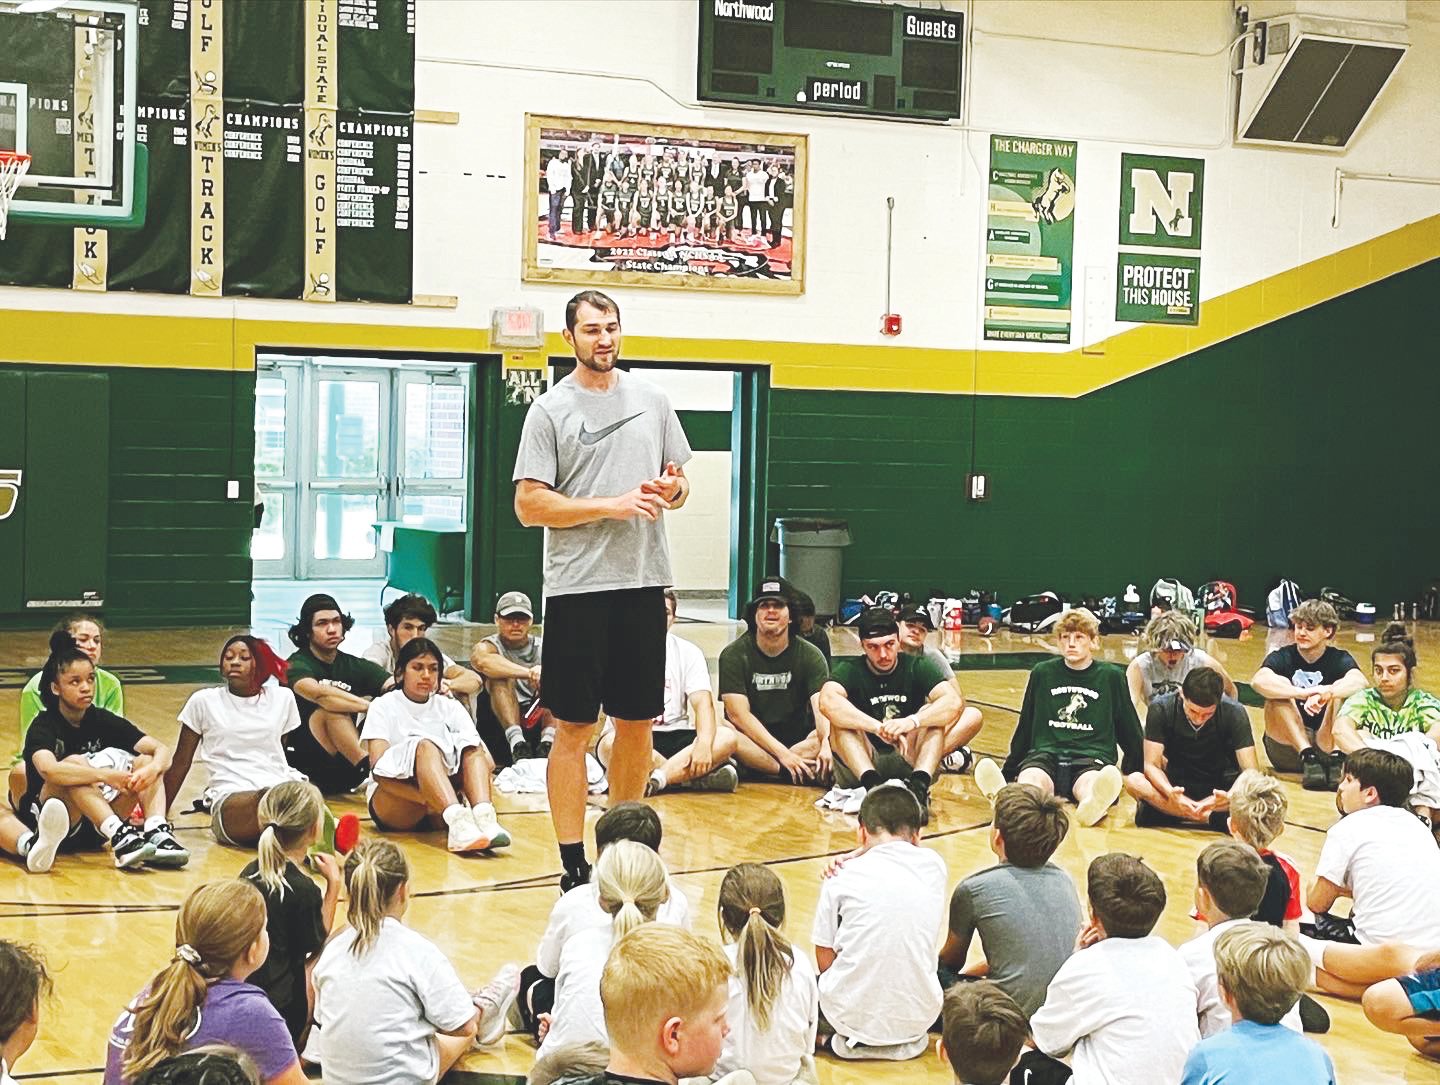 Former UNC Basketball and NBA player Tyler Zeller (center) speaks to a room full of campers at the 4-day Northwood Sports Camp on June 20. Zeller answered questions about his playing career during the session and took photos with each camper in attendance.